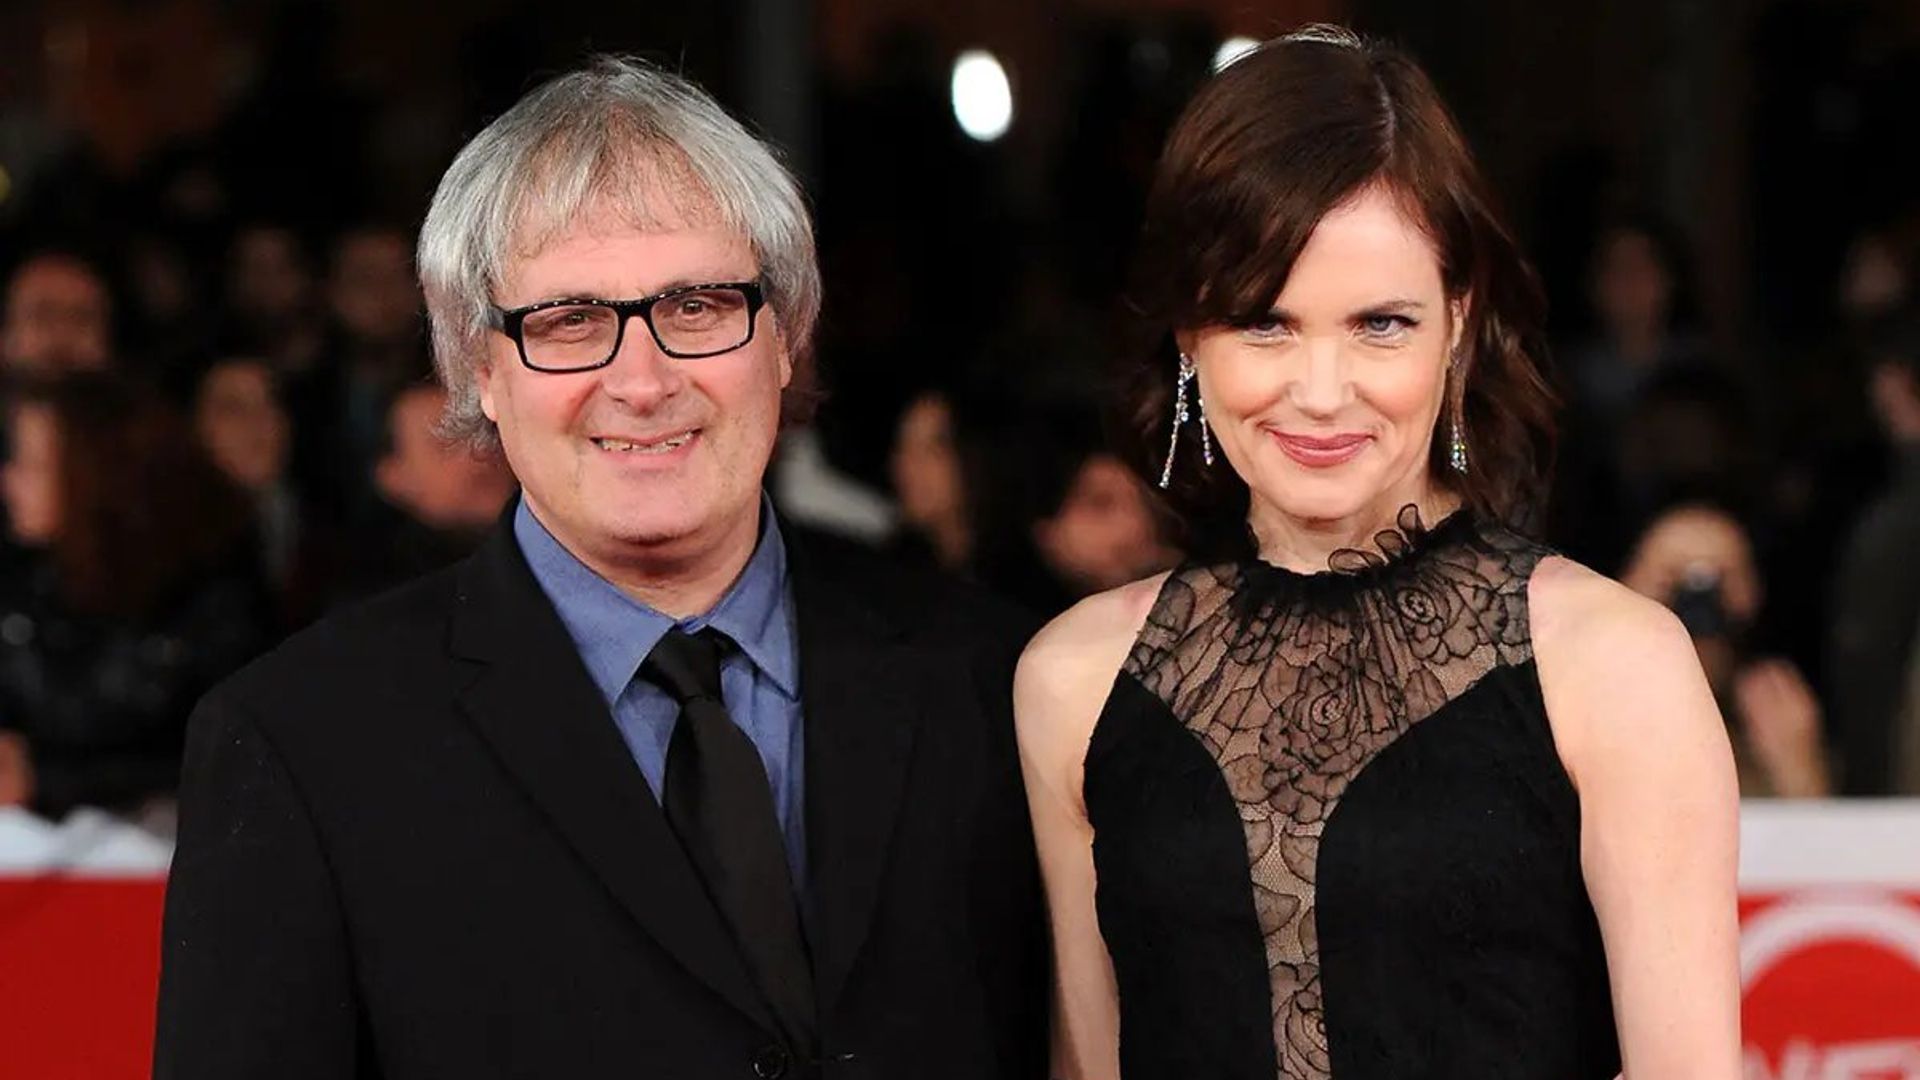 Downton Abbey's Elizabeth McGovern makes very rare comment about director husband